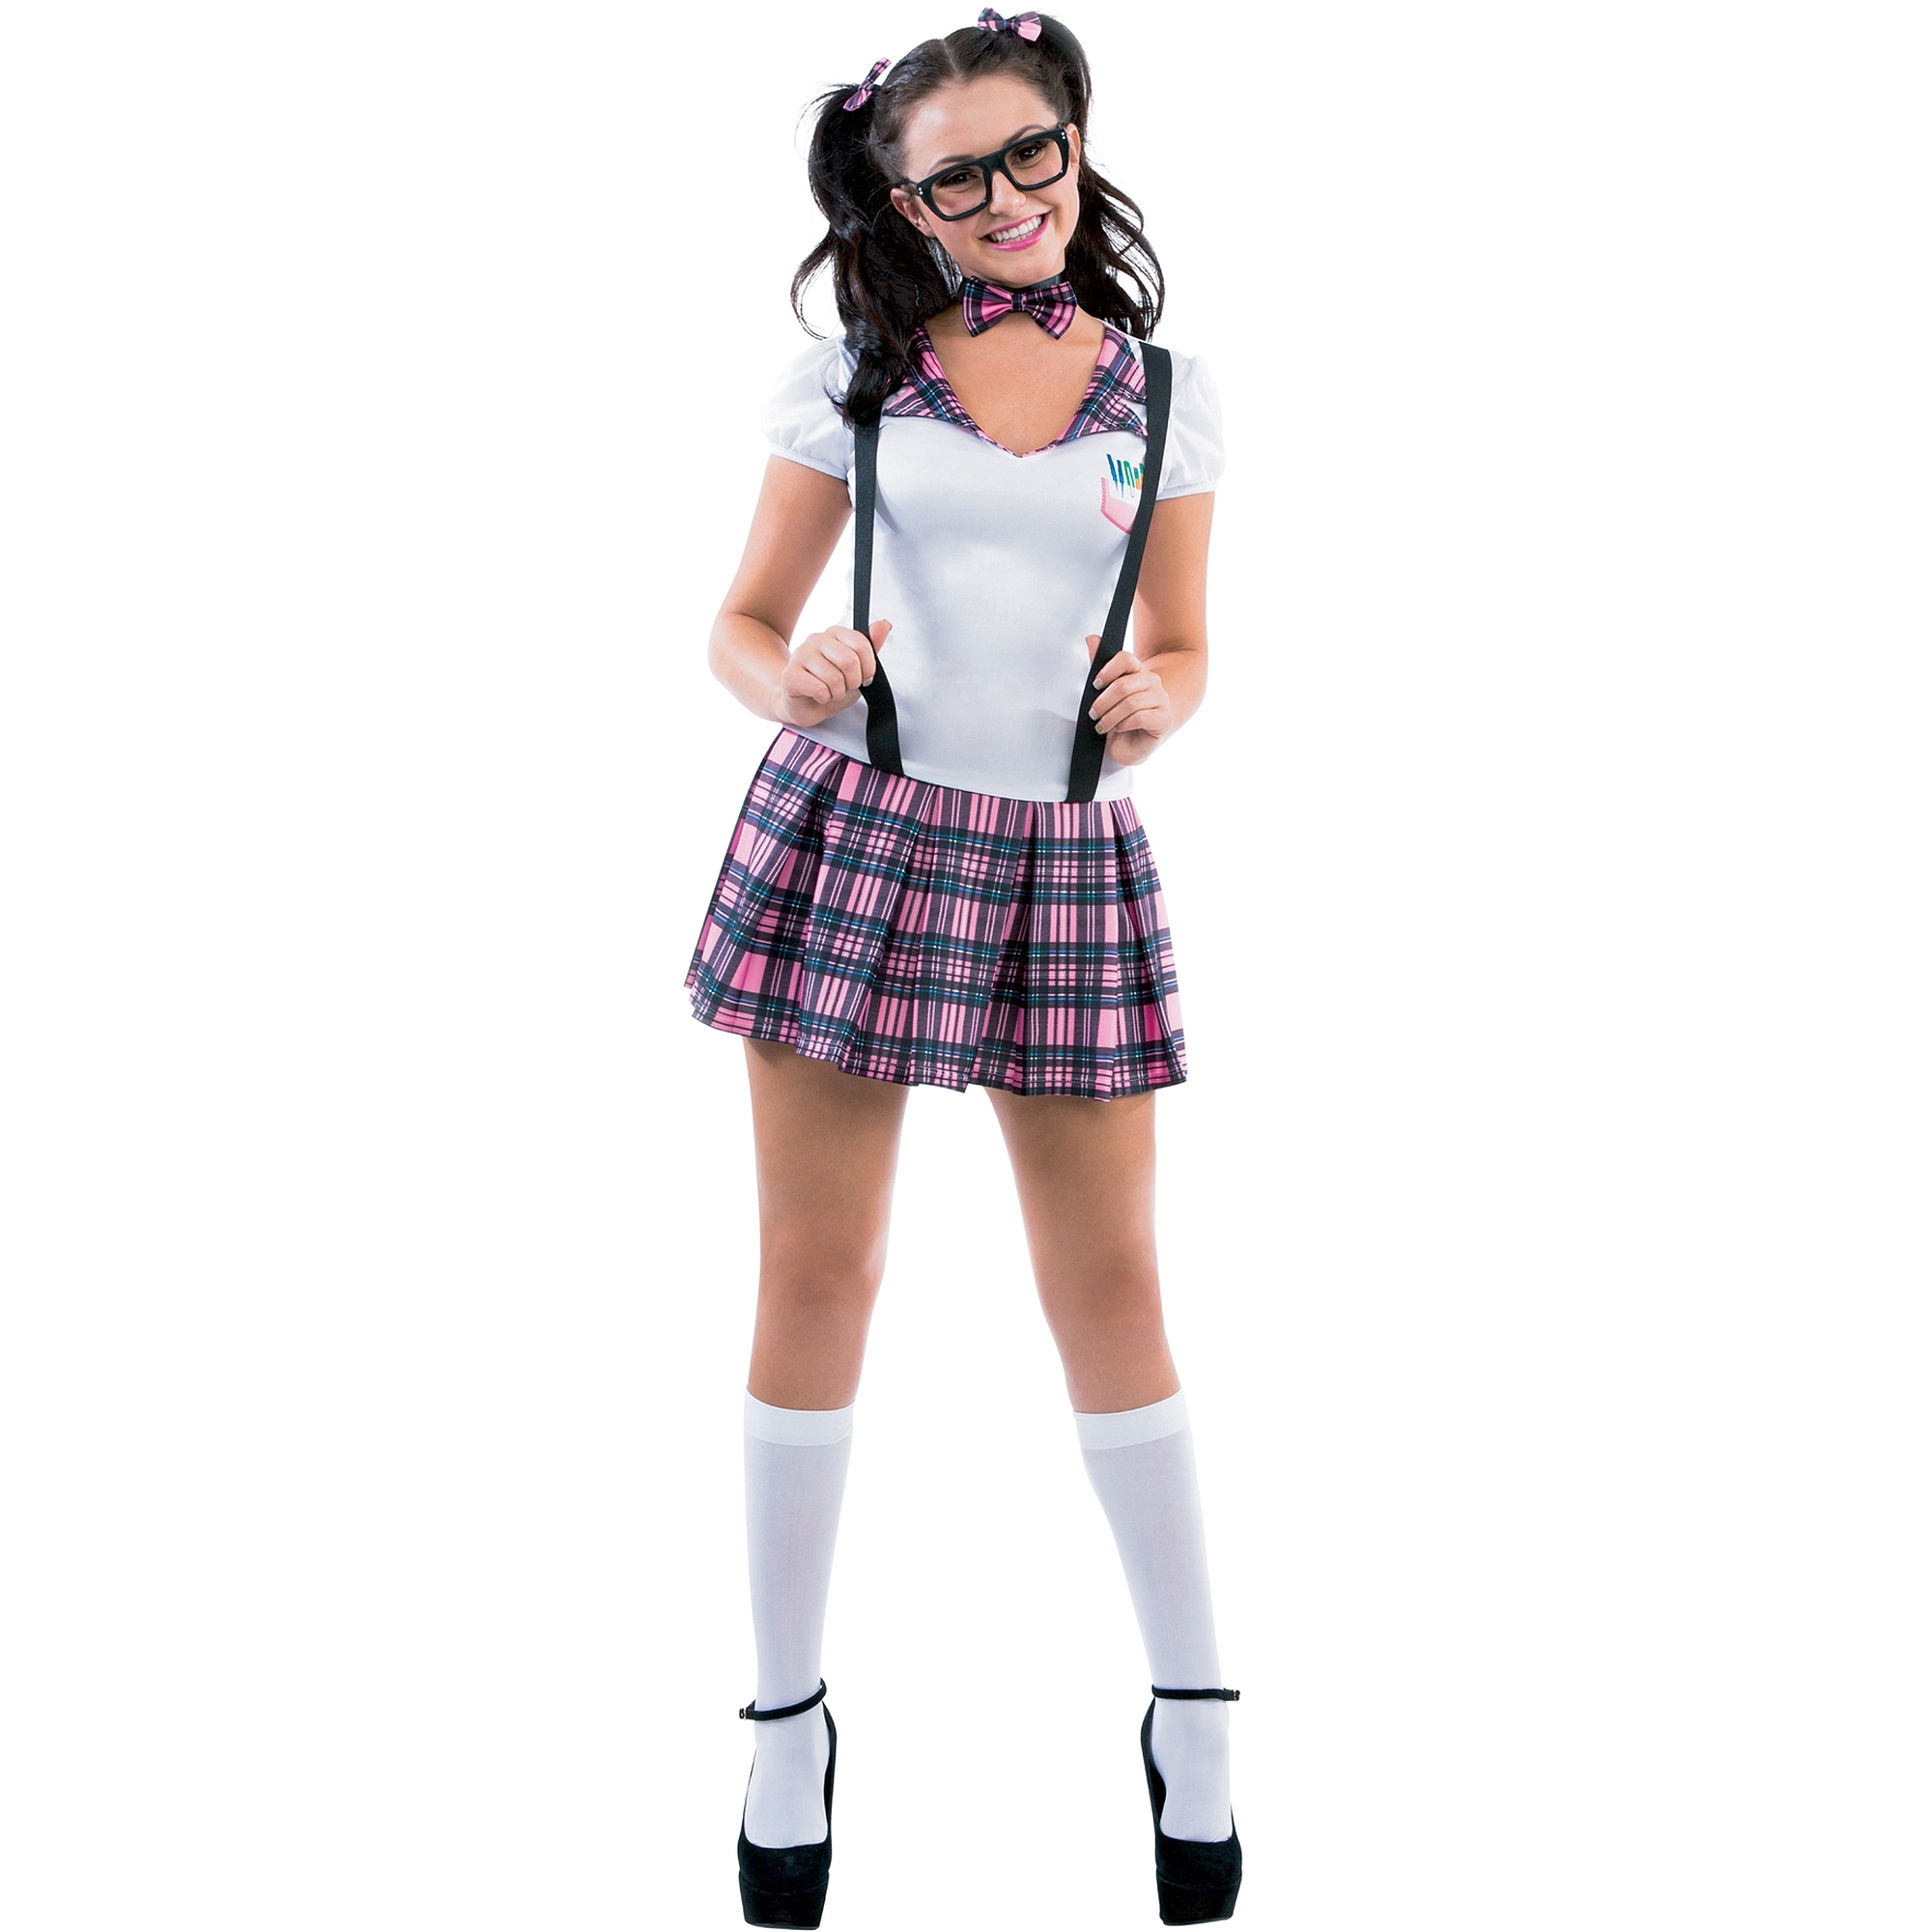 10 Unique Halloween Costume Ideas For Girls Age 10 %name 2022